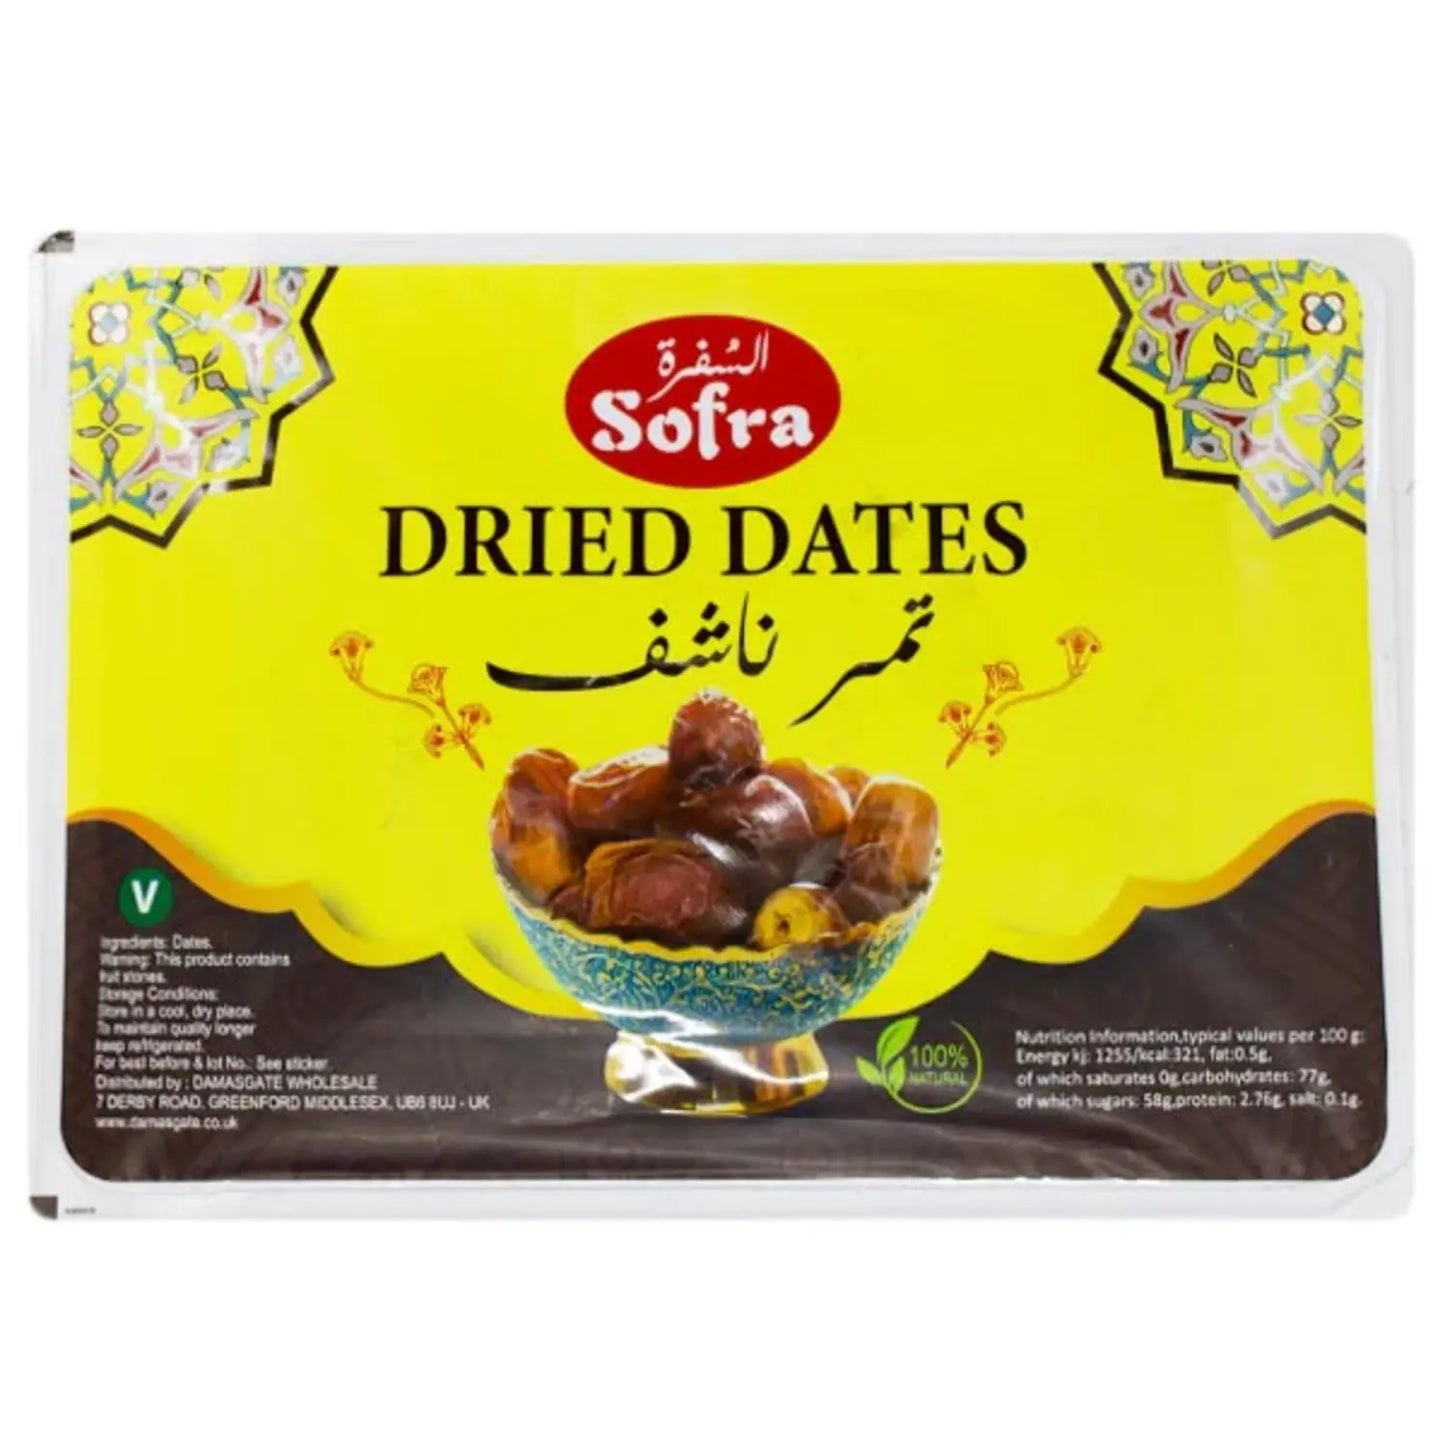 Sofra Dried Dates 500g